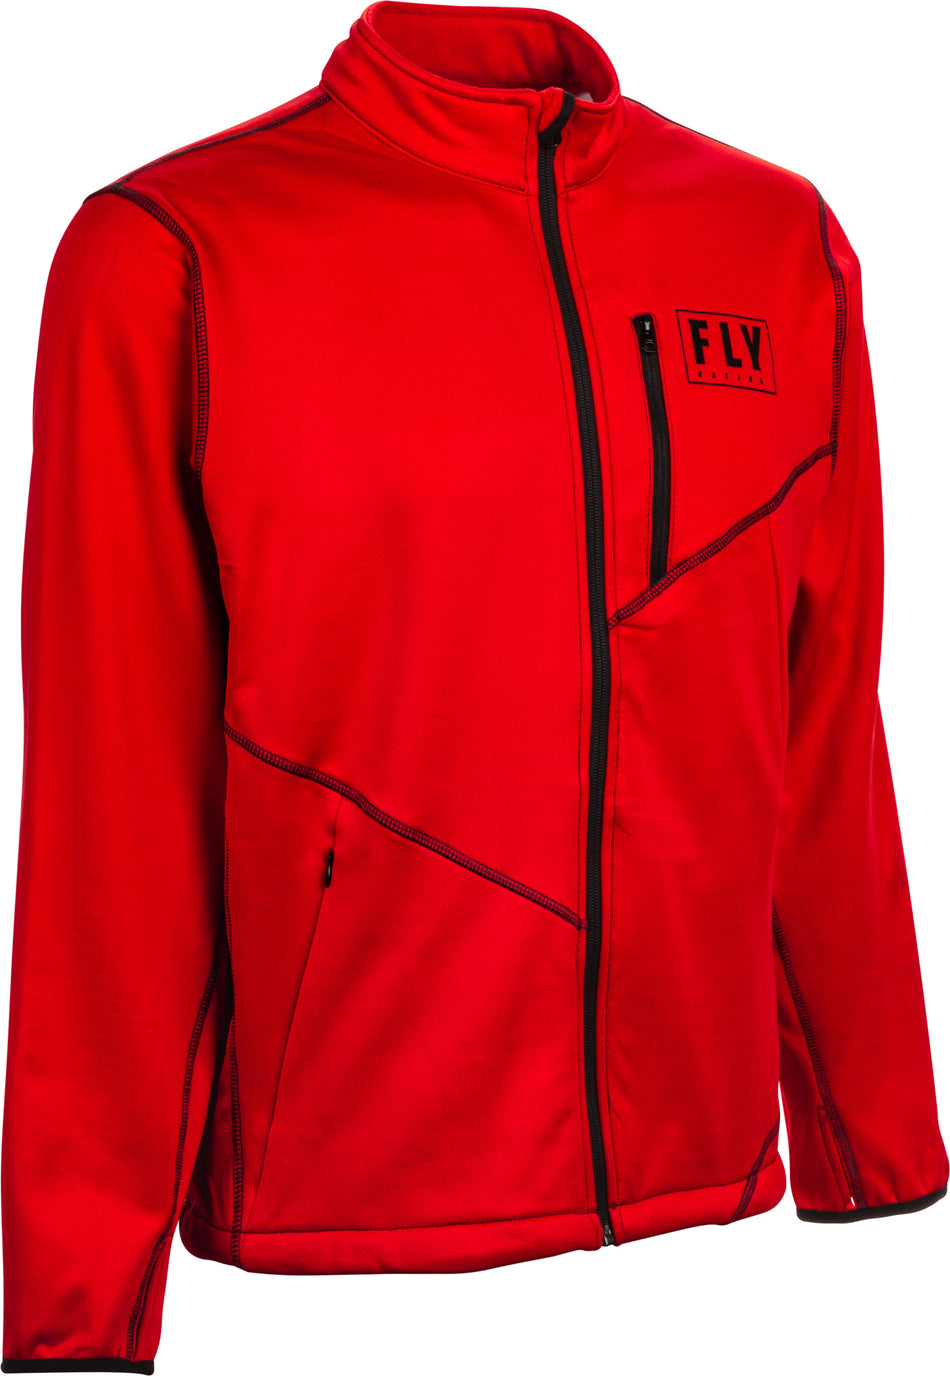 FLY RACING Mid-Layer Jacket Red Xl 354-6321X